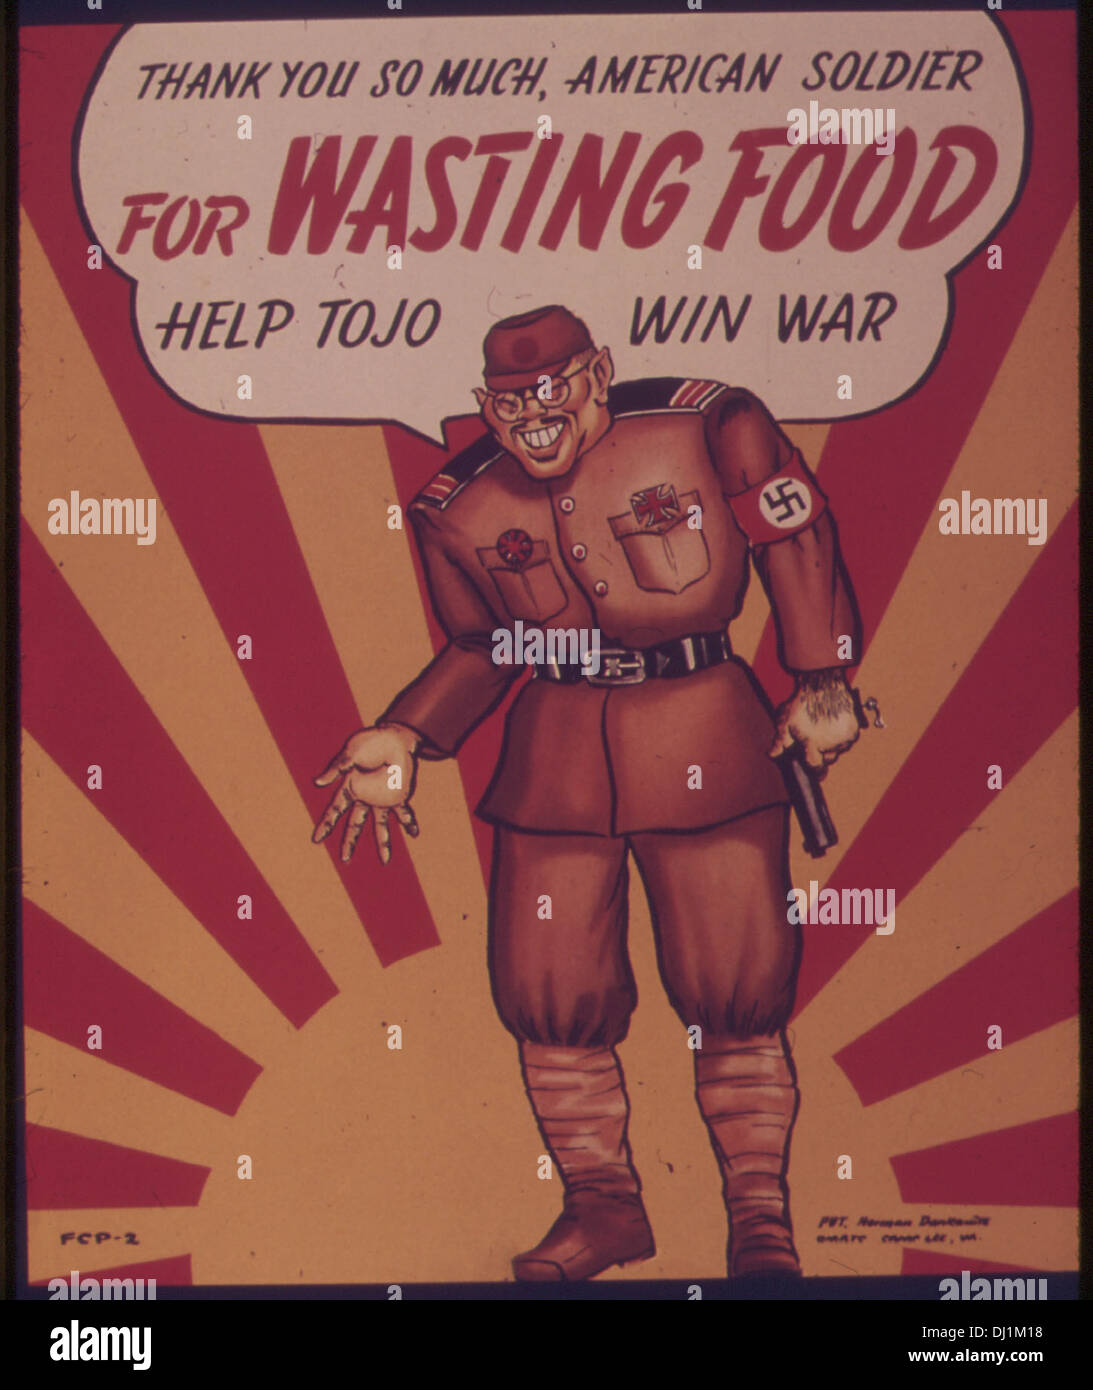 THANK YOU SO MUCH AMERICAN SOLDIER FOR WASTING FOOD - HELP TOJO WIN WAR. 530 Stock Photo